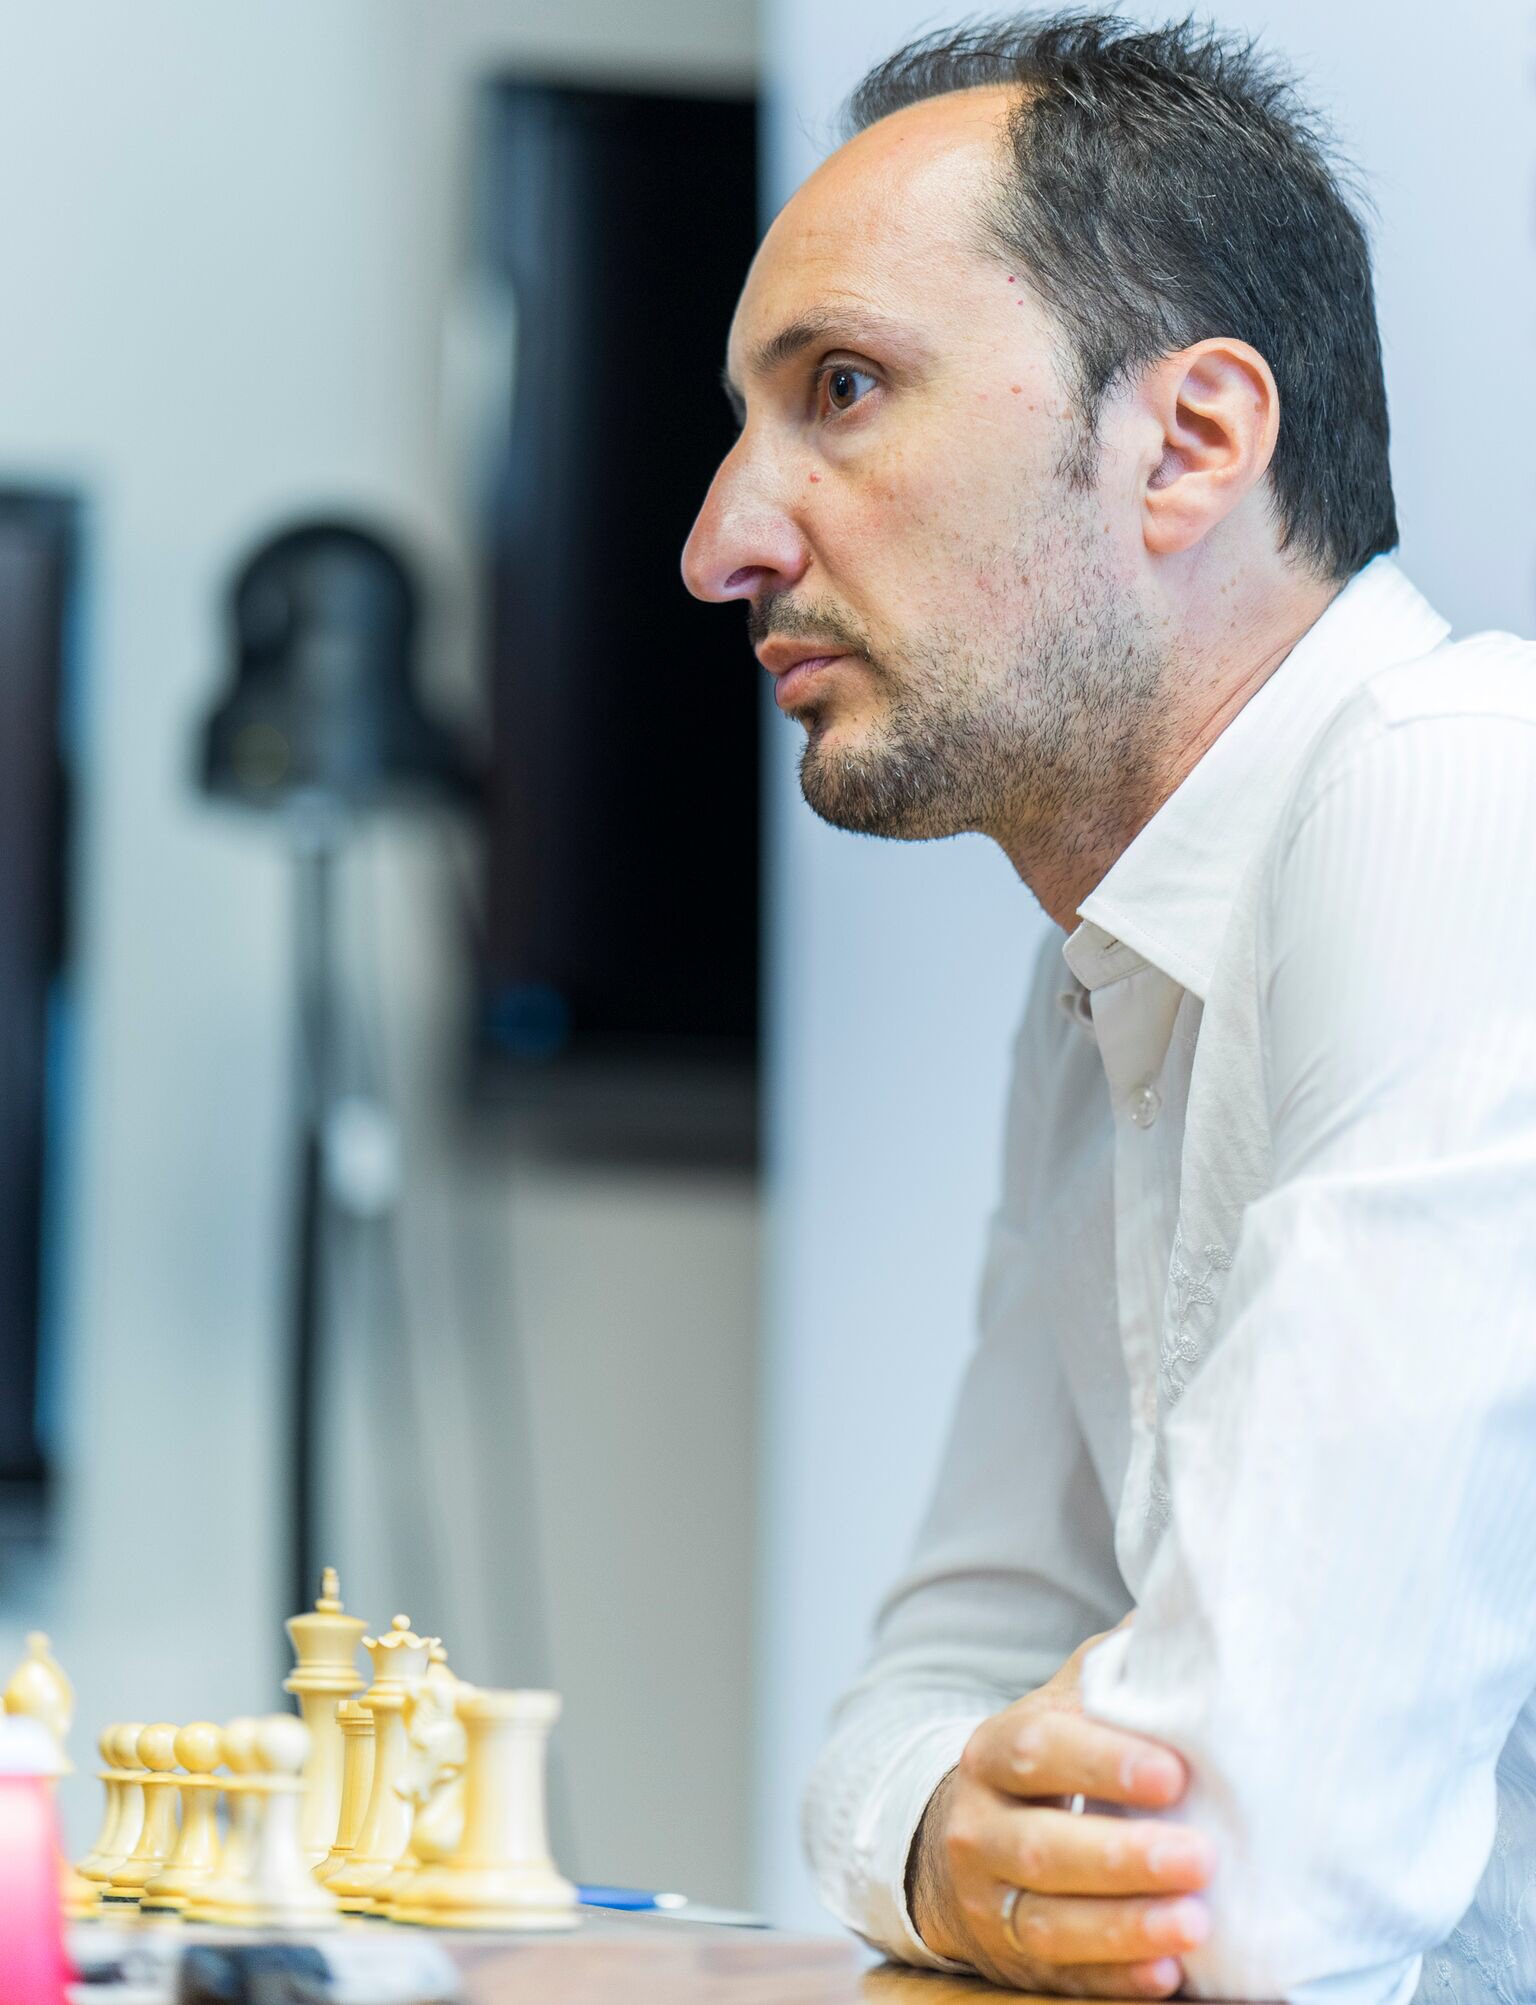 Veselin Topalov leads the pack after Round 5. Photo credit: Grand Chess Tour